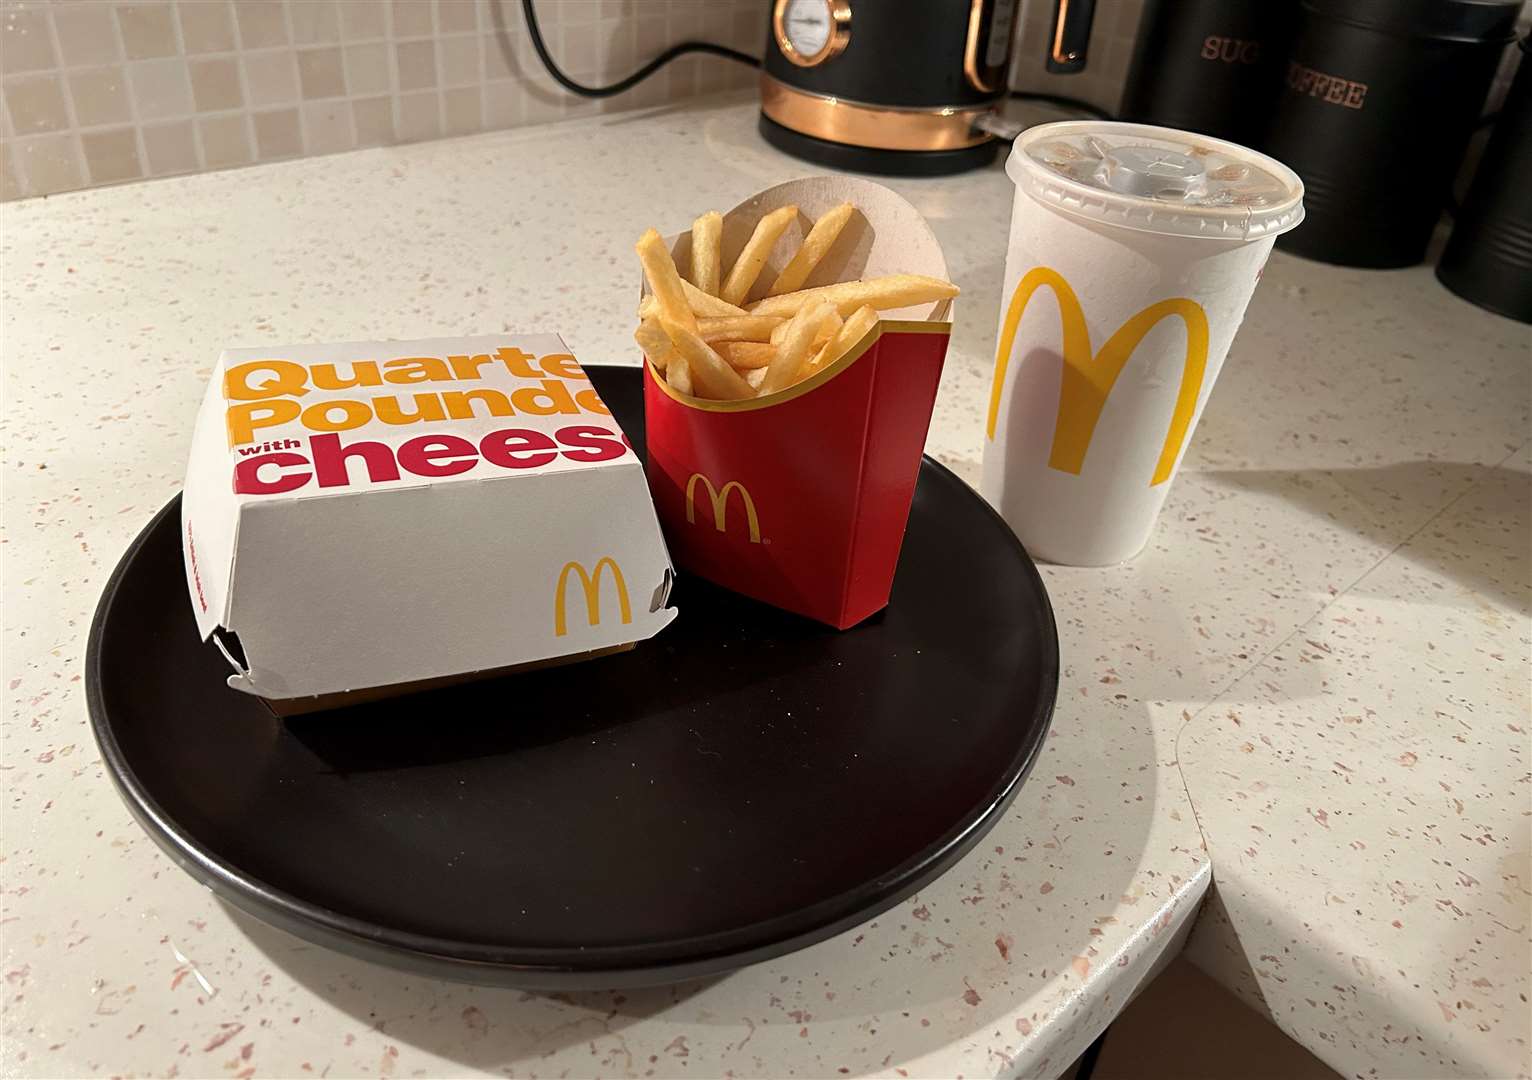 The McDonald's takeaway was cold and overpriced